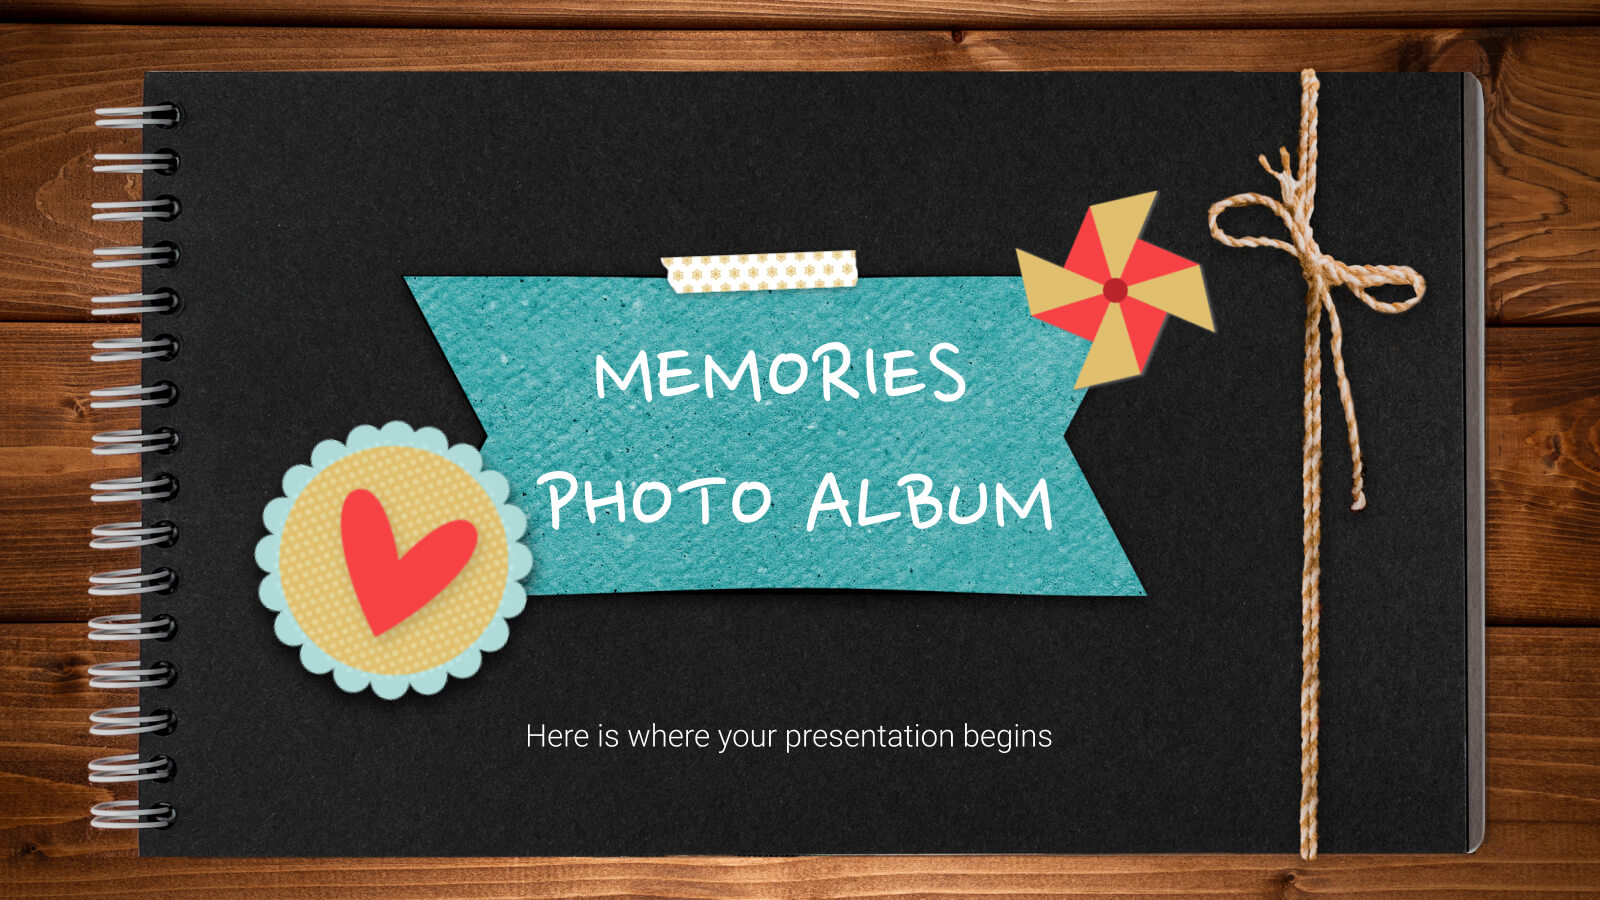 Memories Photo Album Google Slides Theme And Powerpoint Template Intended For Powerpoint Photo Album Template